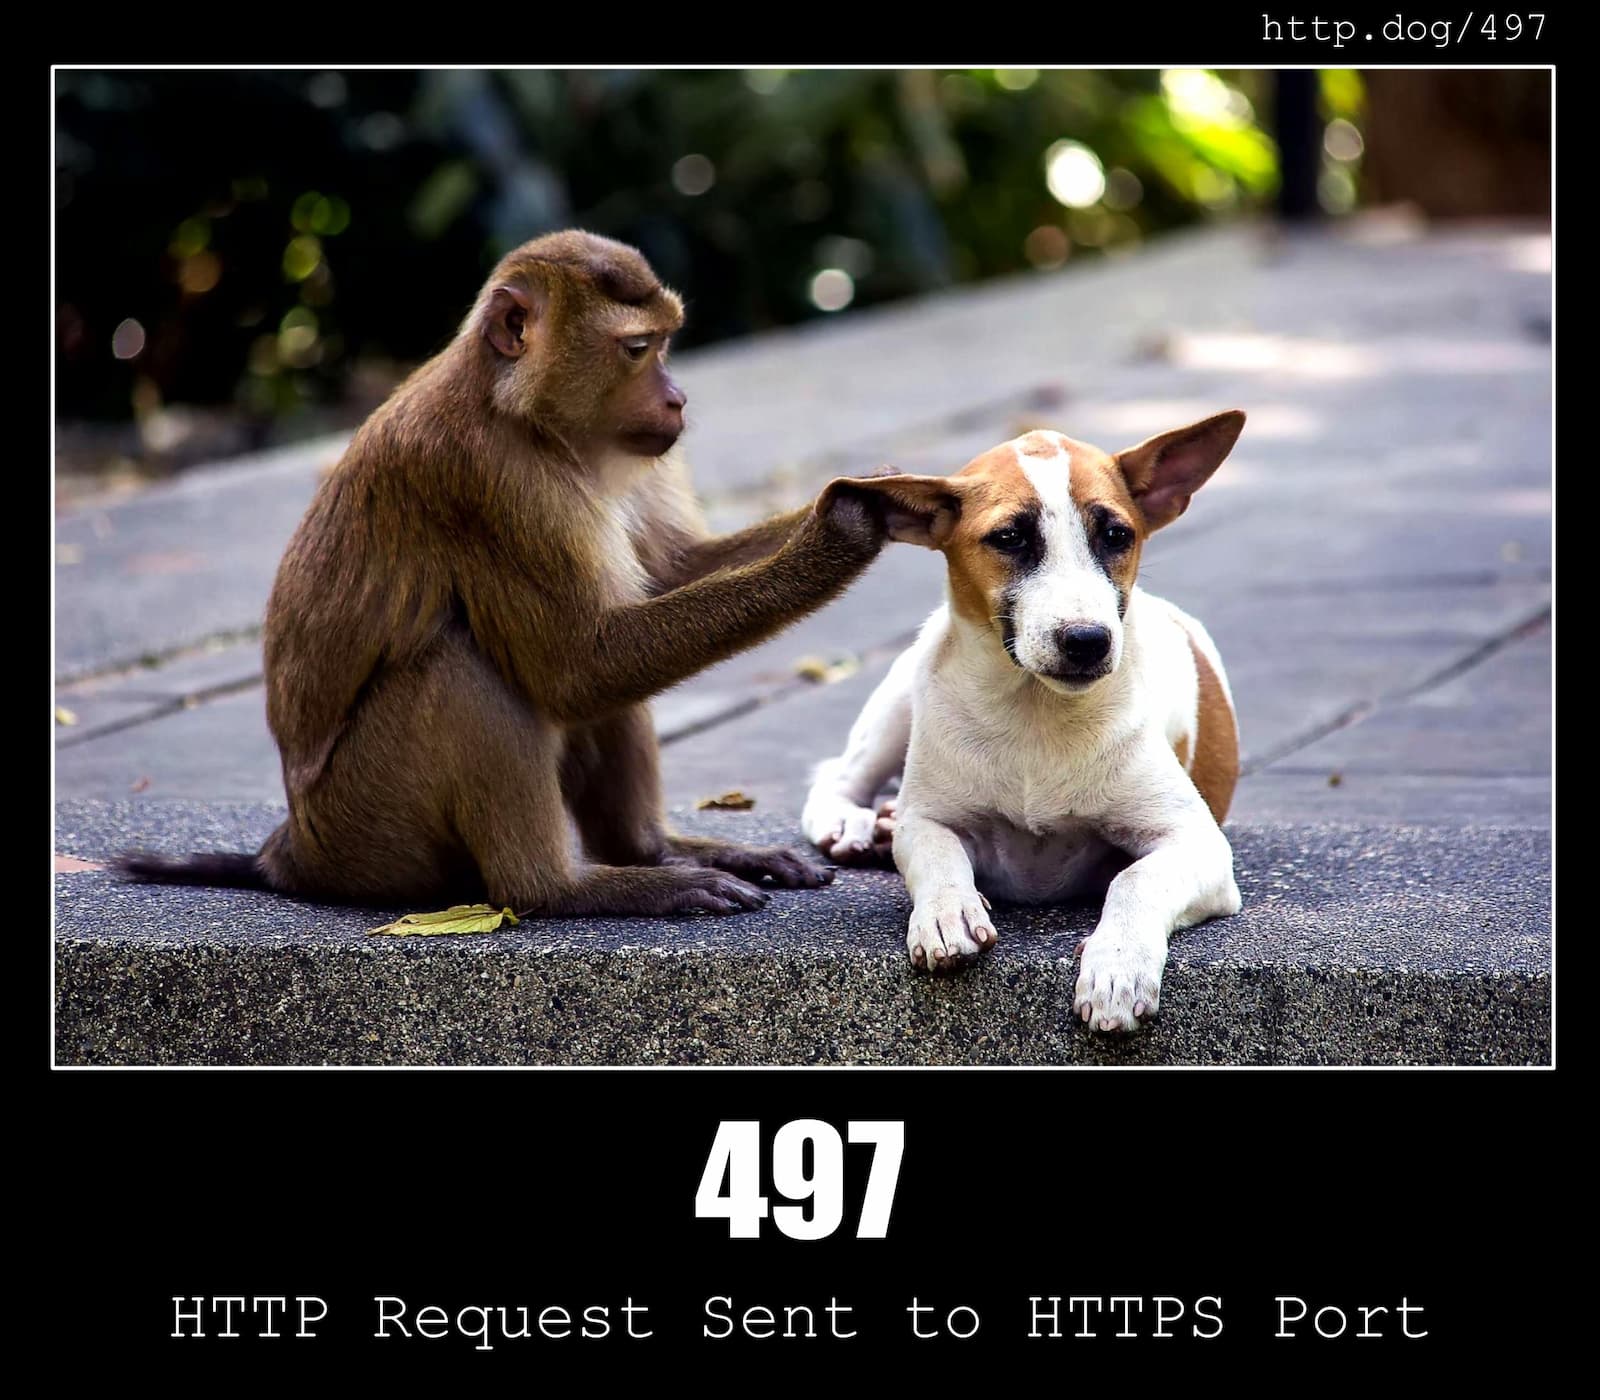 HTTP Status Code 497 HTTP Request Sent to HTTPS Port & Dogs